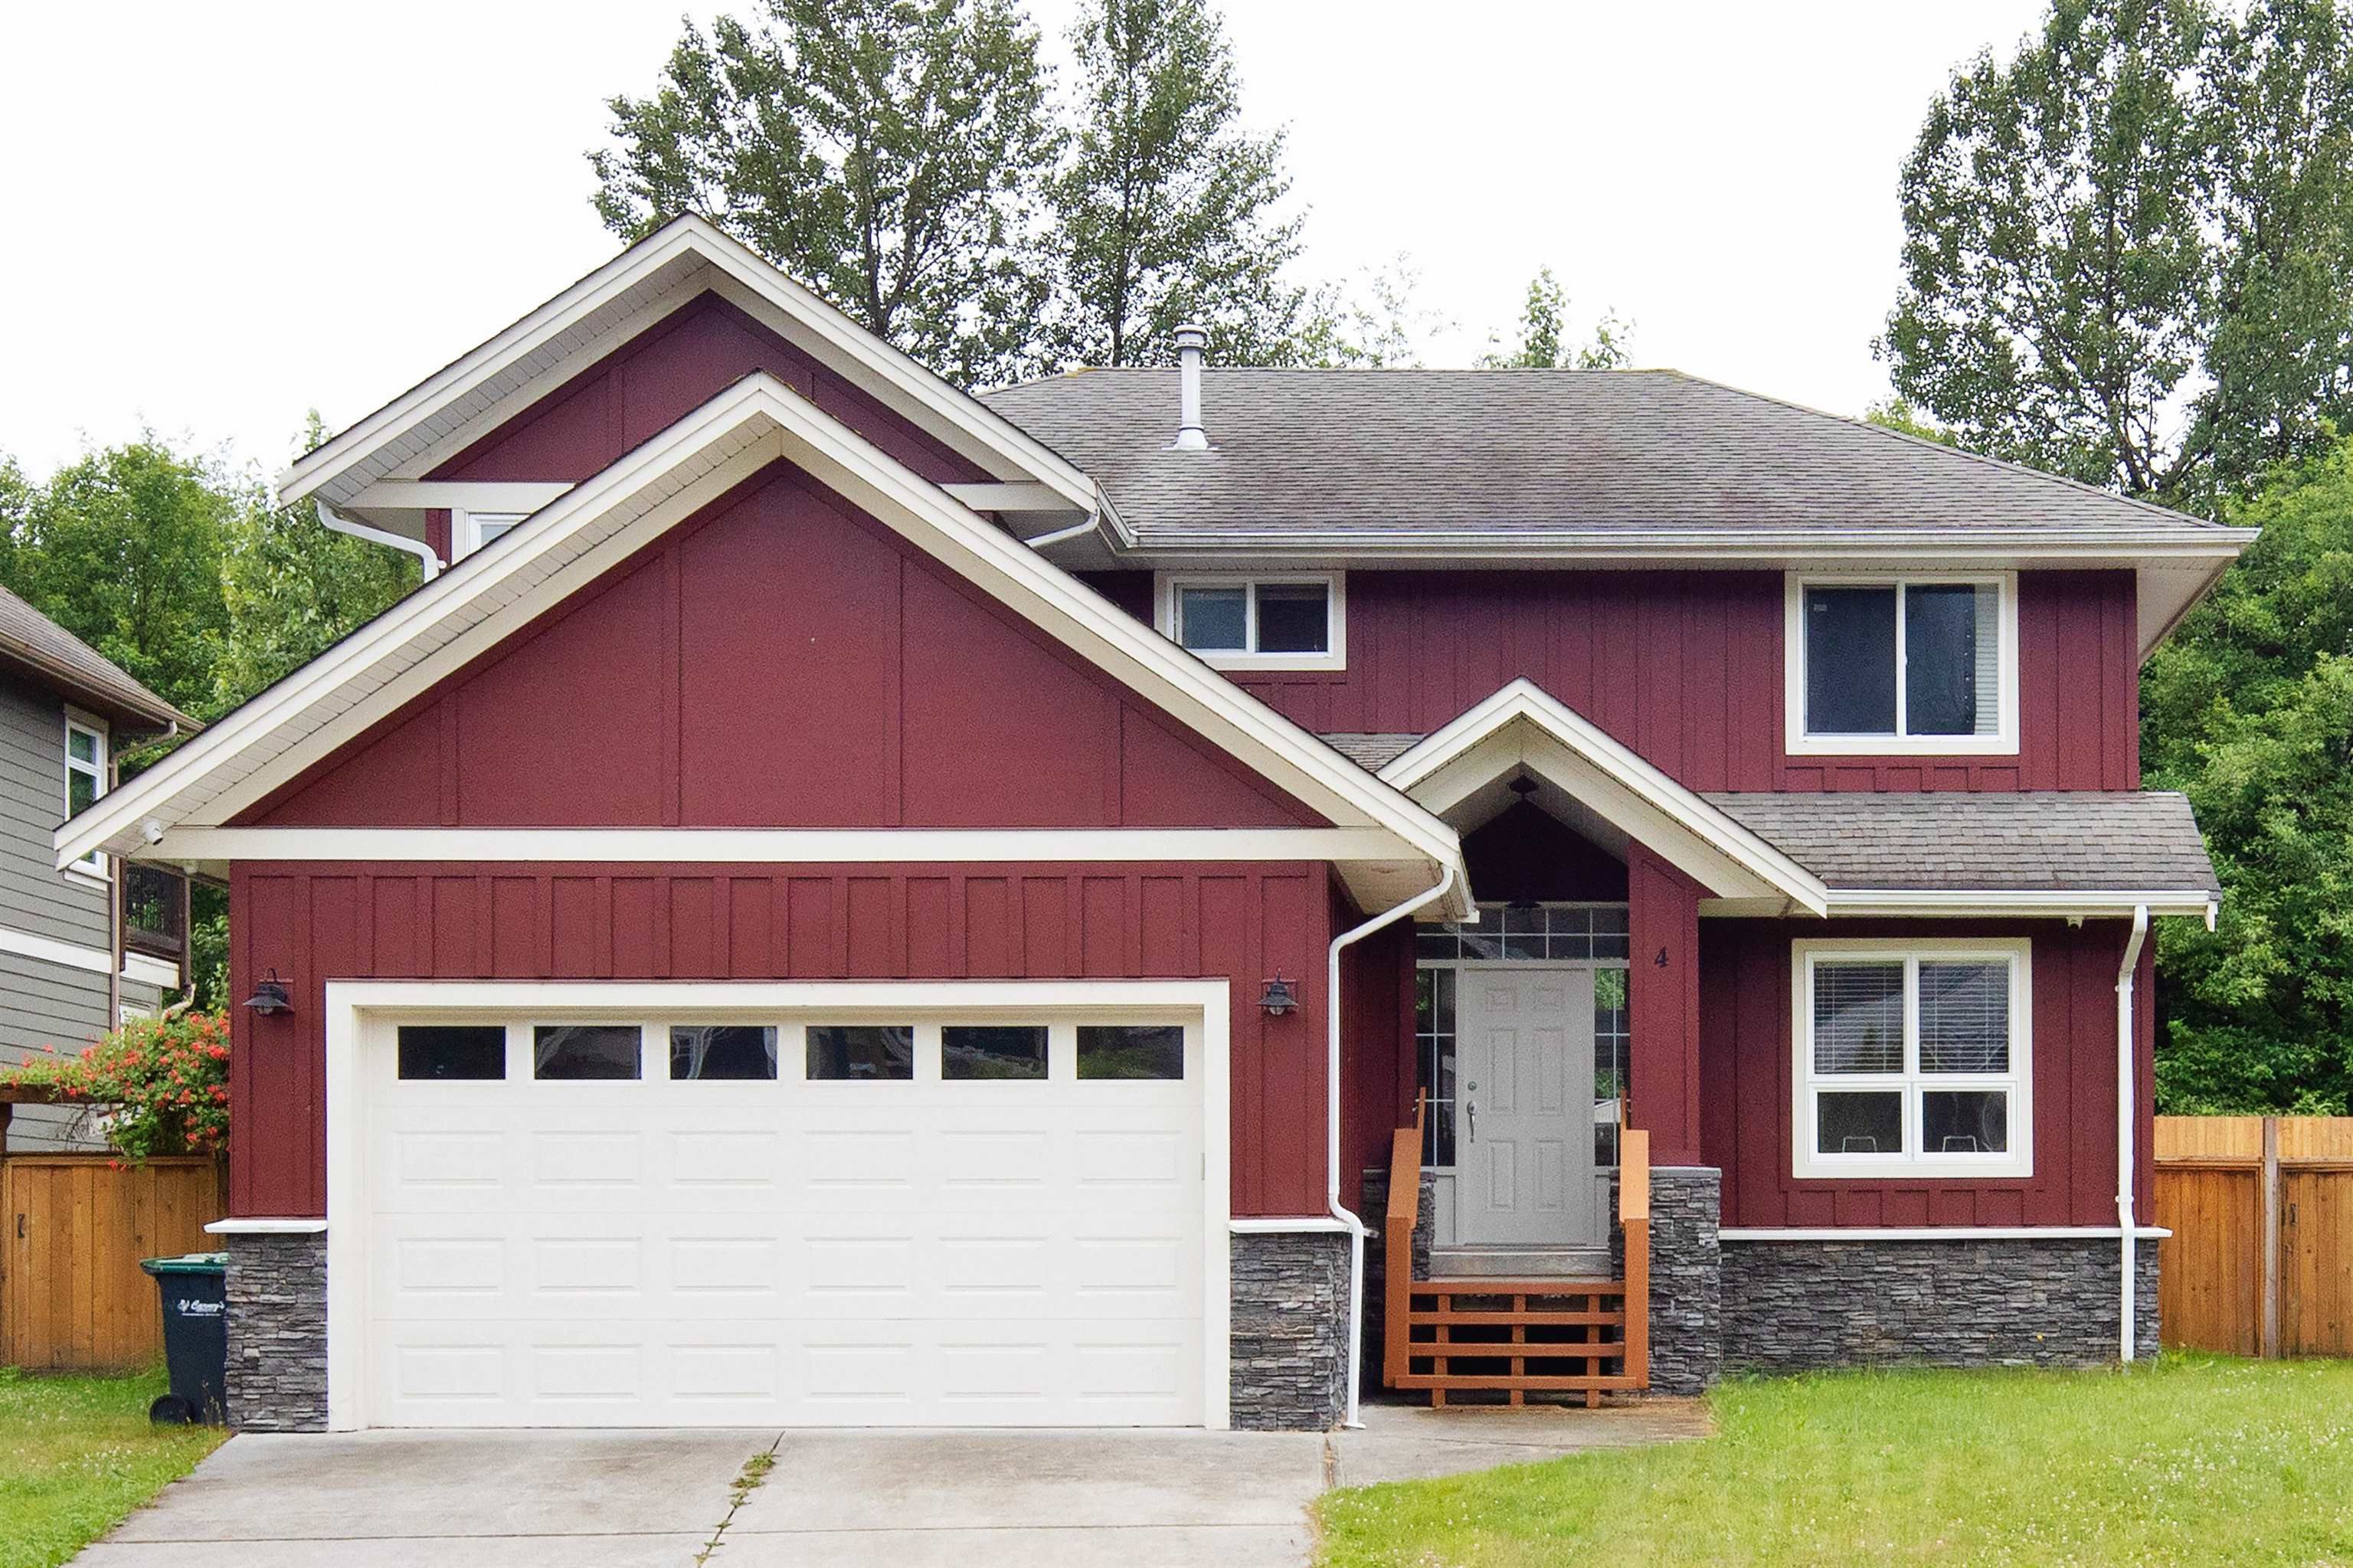 Main Photo: 4 1589 EAGLE RUN Drive in Squamish: Brackendale House for sale : MLS®# R2707435